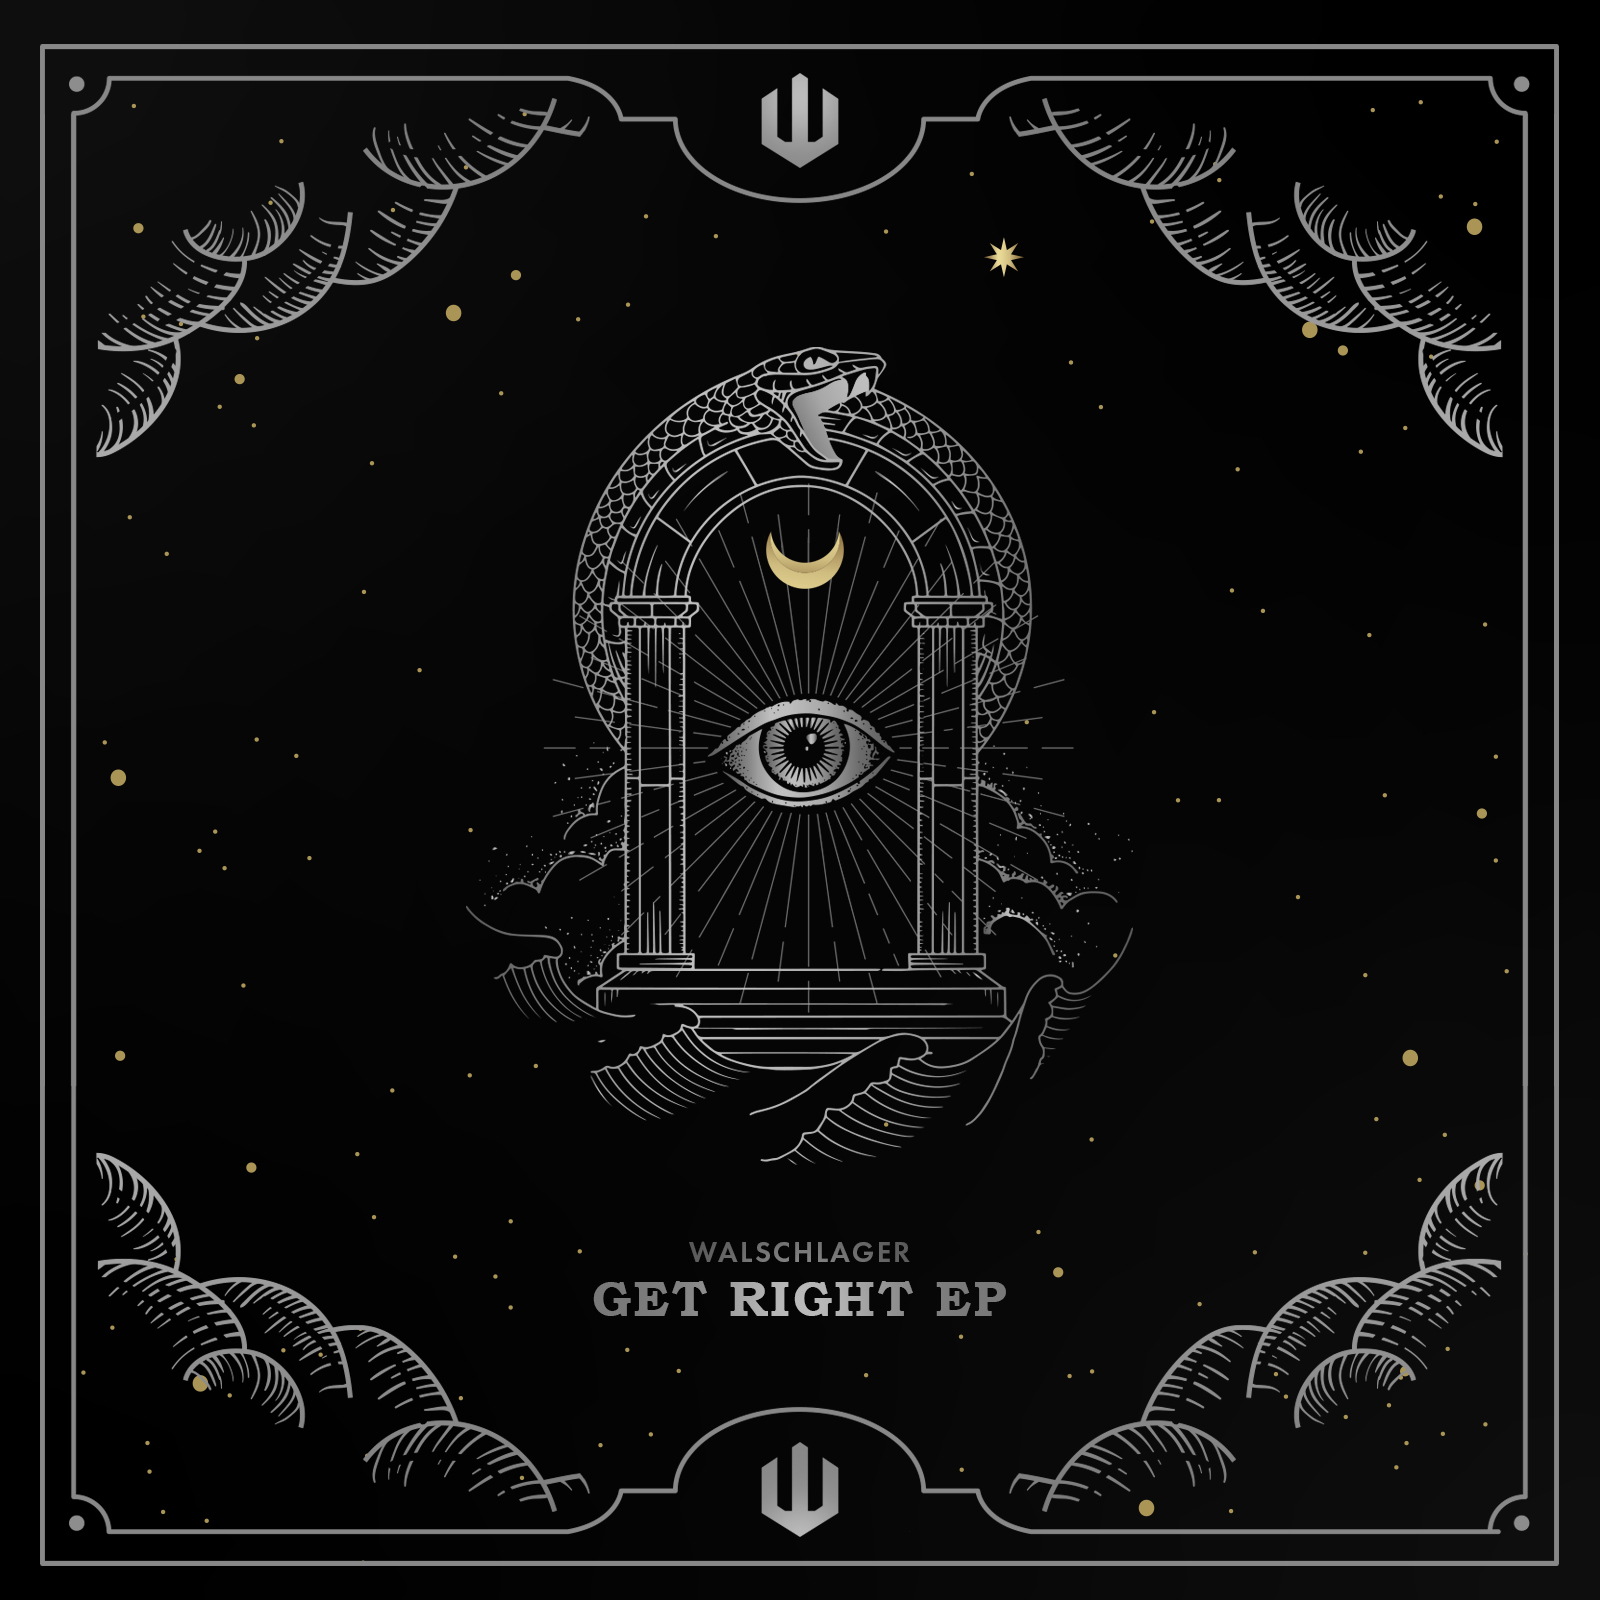 Walschlager Drops Club-Ready Collection Of Songs In ‘Get Right’ EP